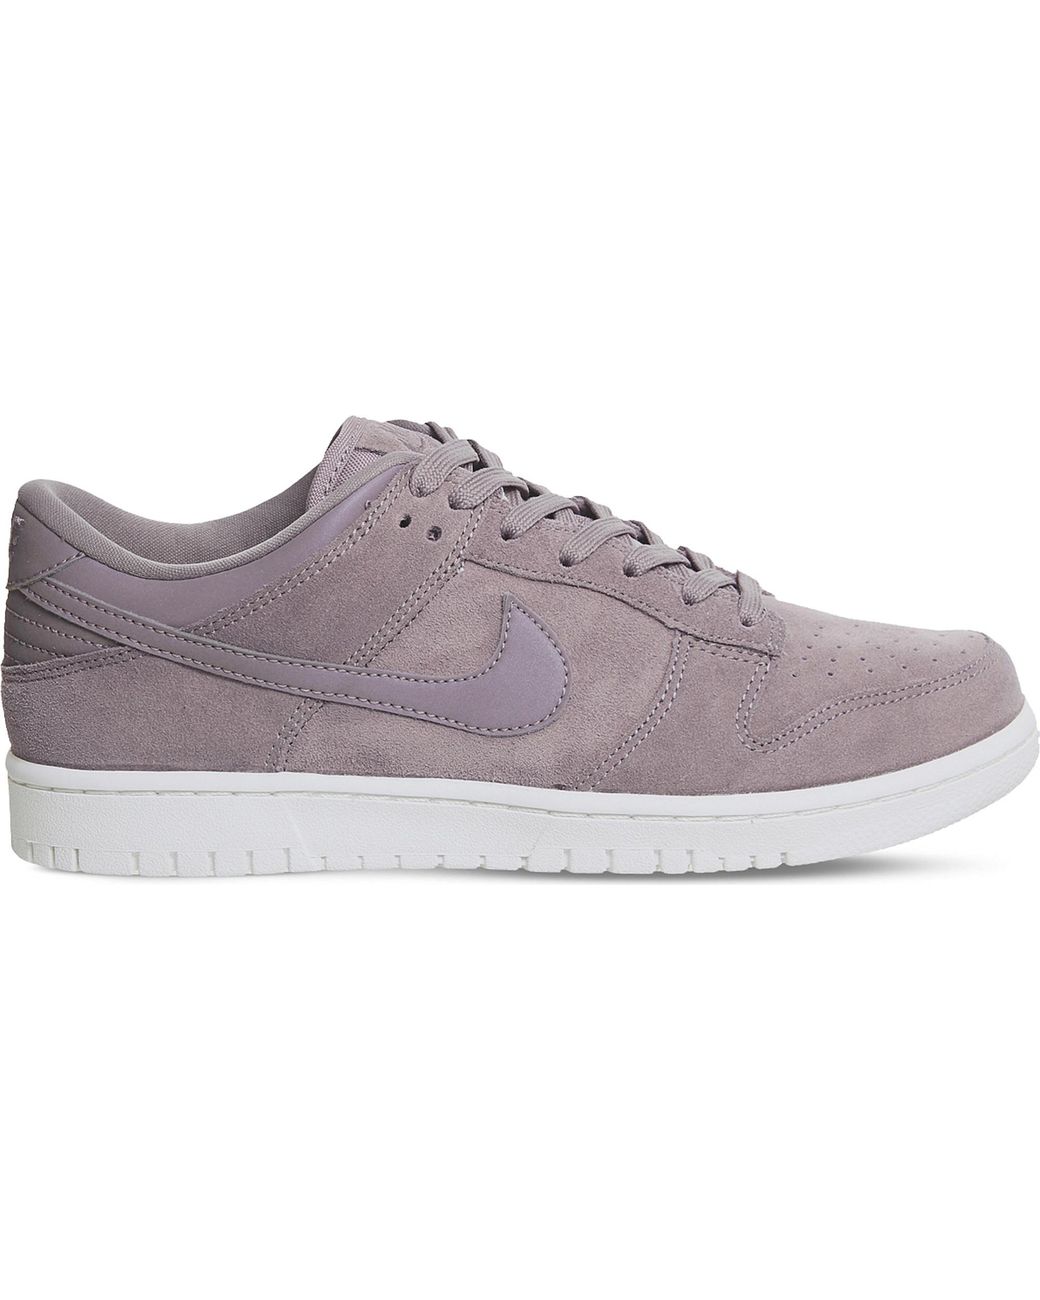 Nike Dunk Low Suede Trainers in Grey | Lyst Canada